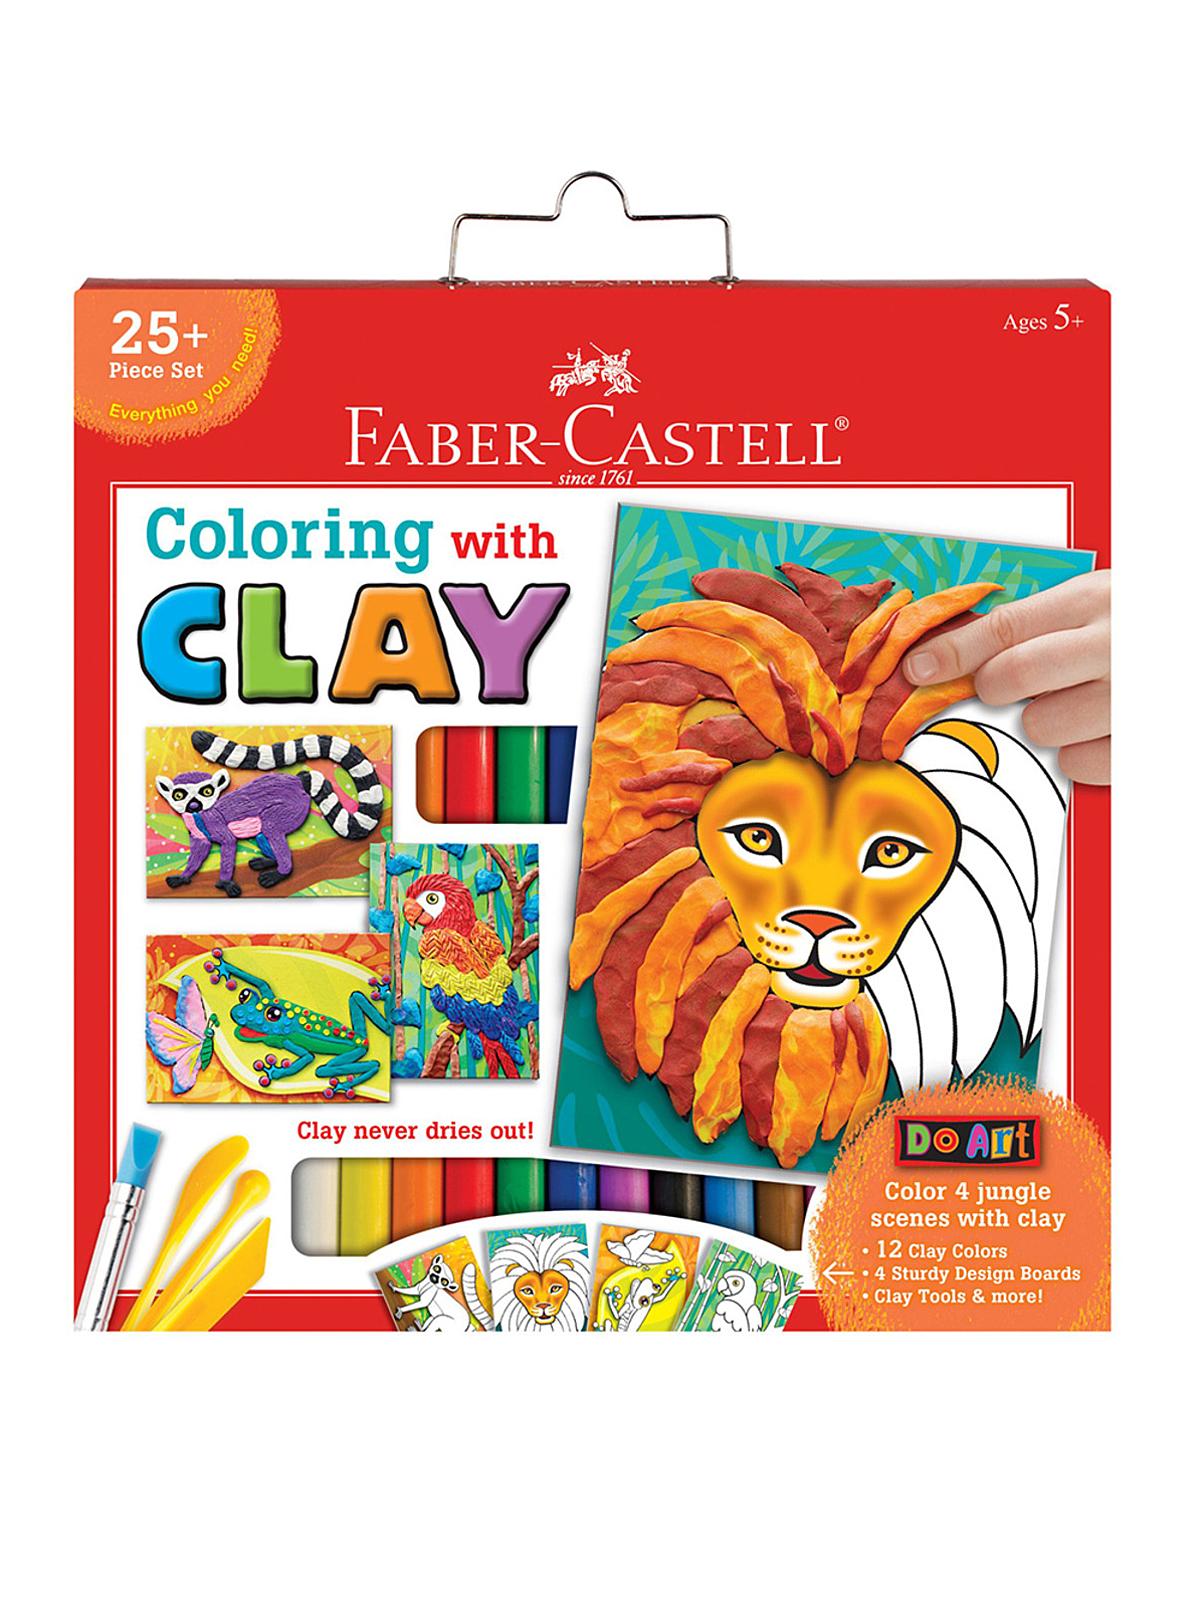 Do Art Coloring With Clay Kit